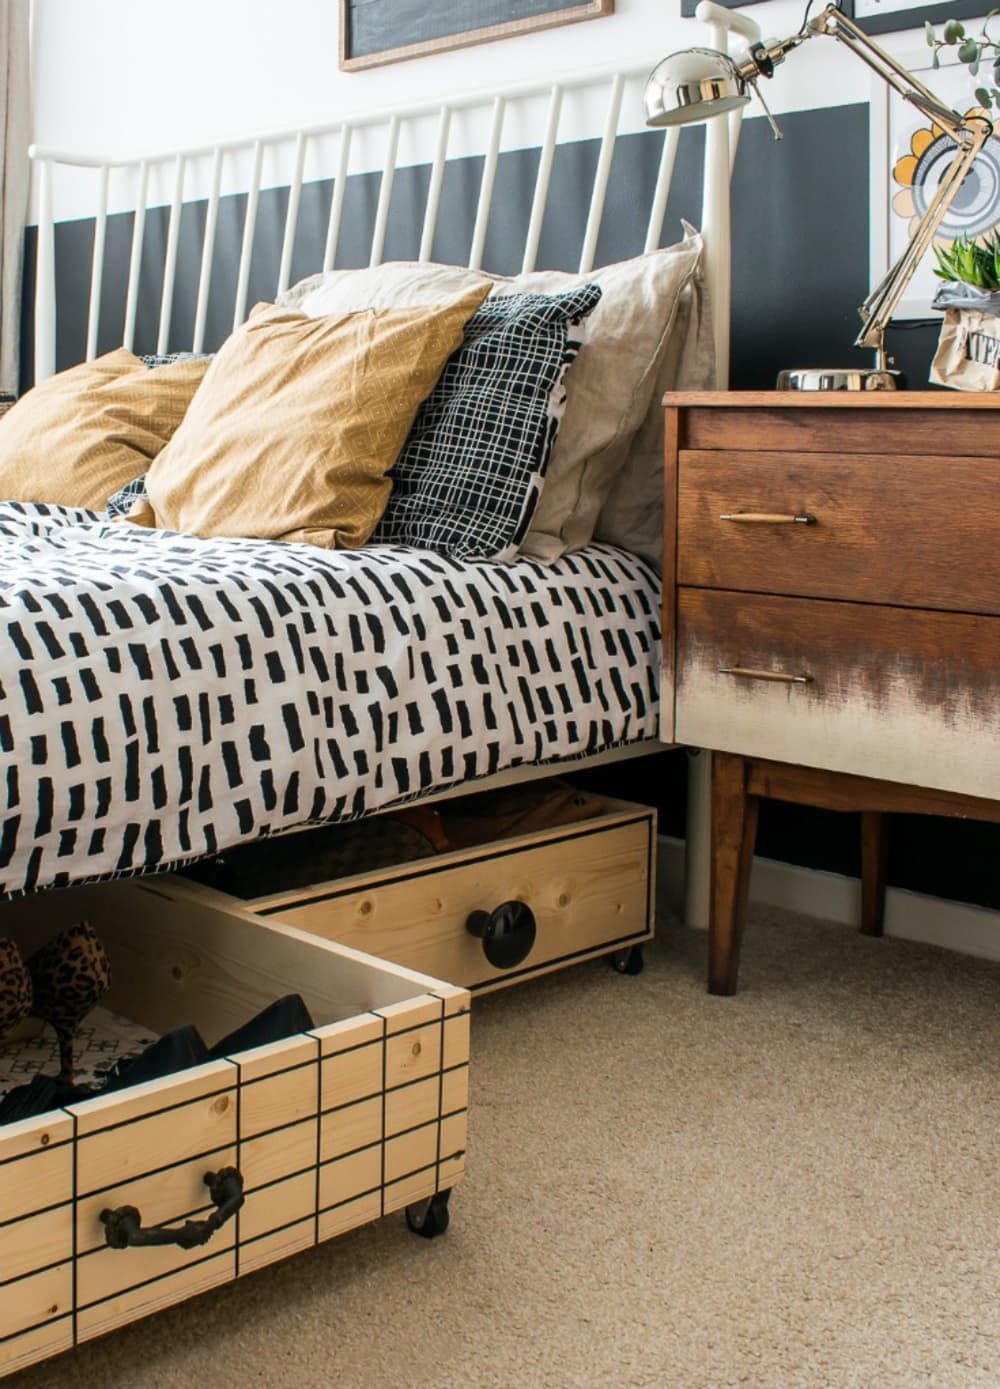 23 creative storage bed ideas to add to your bag - 153